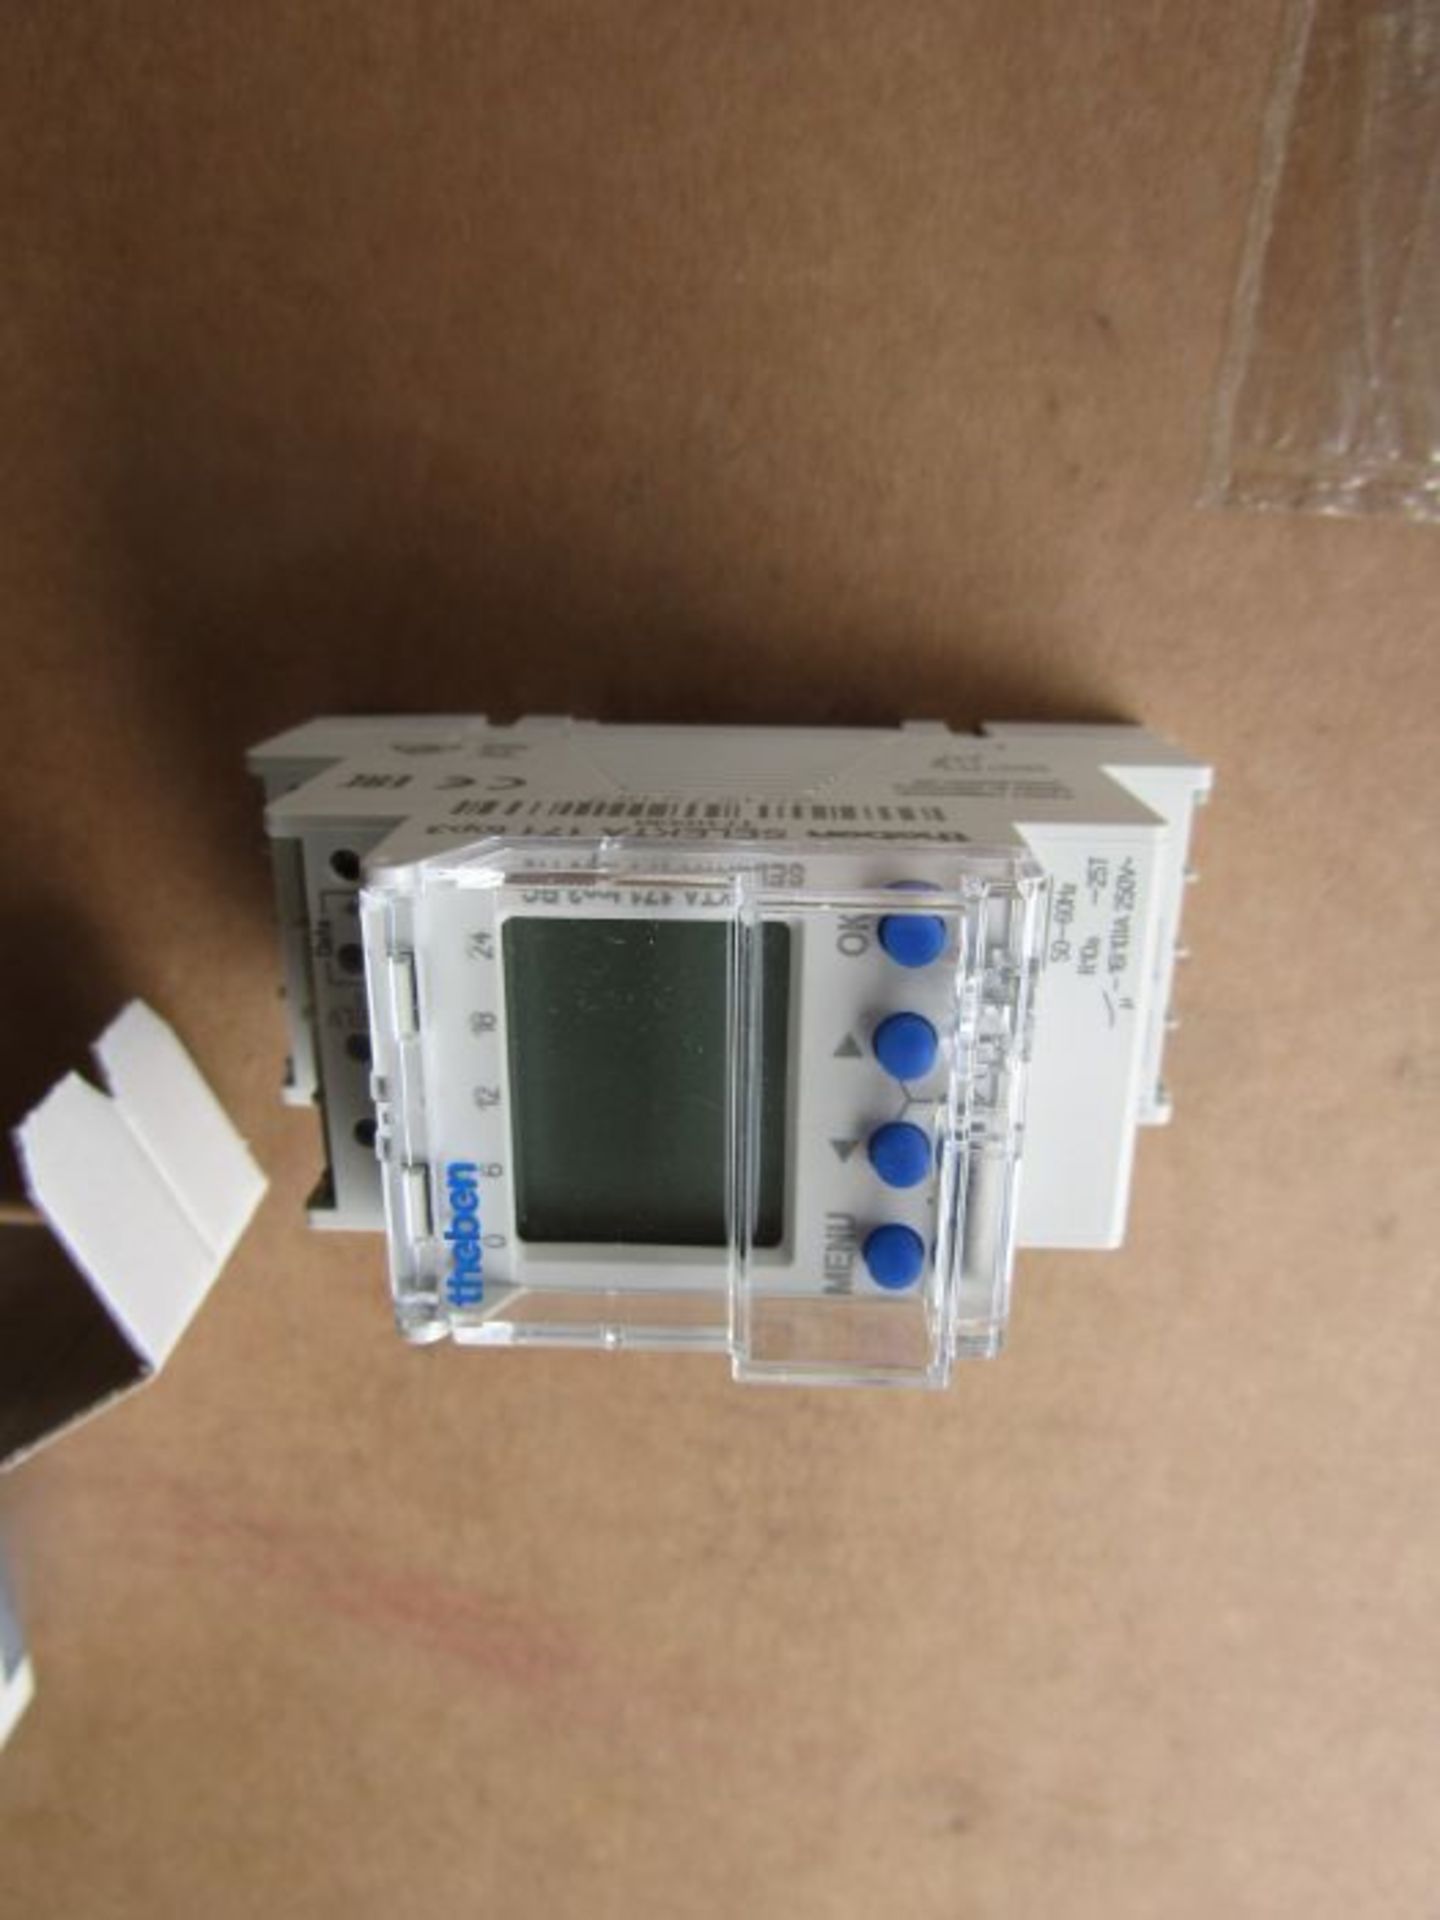 Theben Digital SELEKTA 171 RC TOP 3 DIN Rail Time Switch 110 230 V ac 1-Channel A3 1806213 - Image 4 of 6